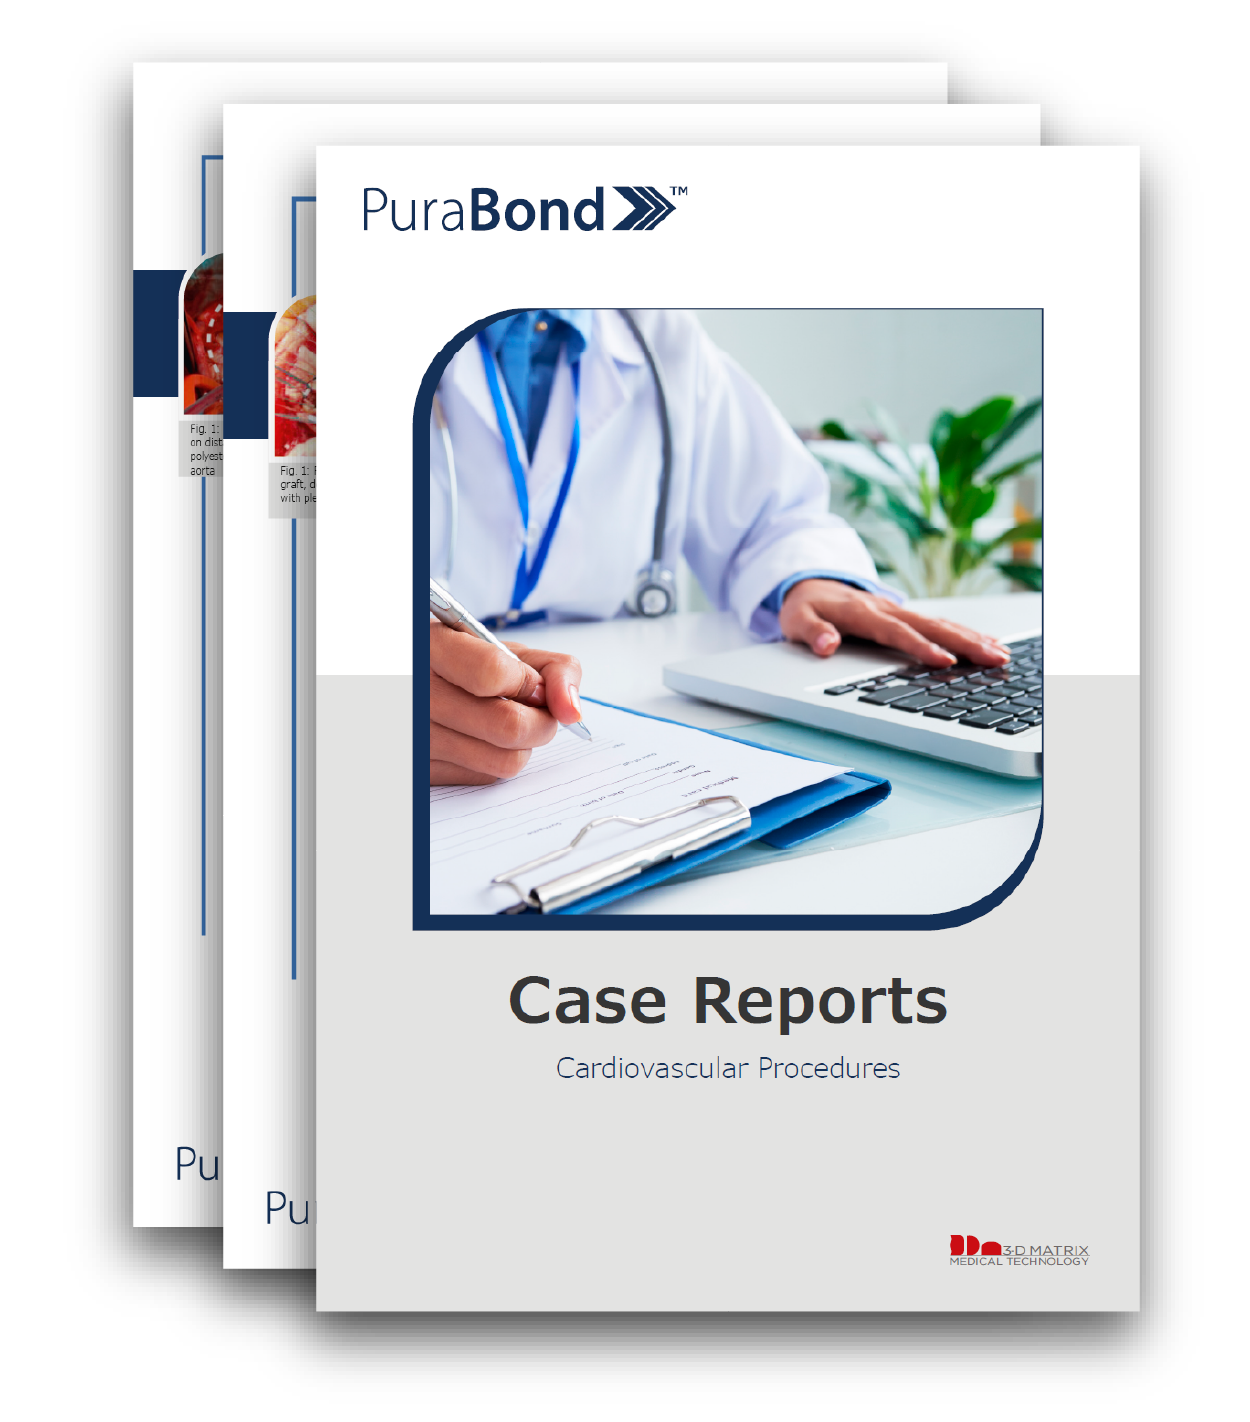 Read our case reports